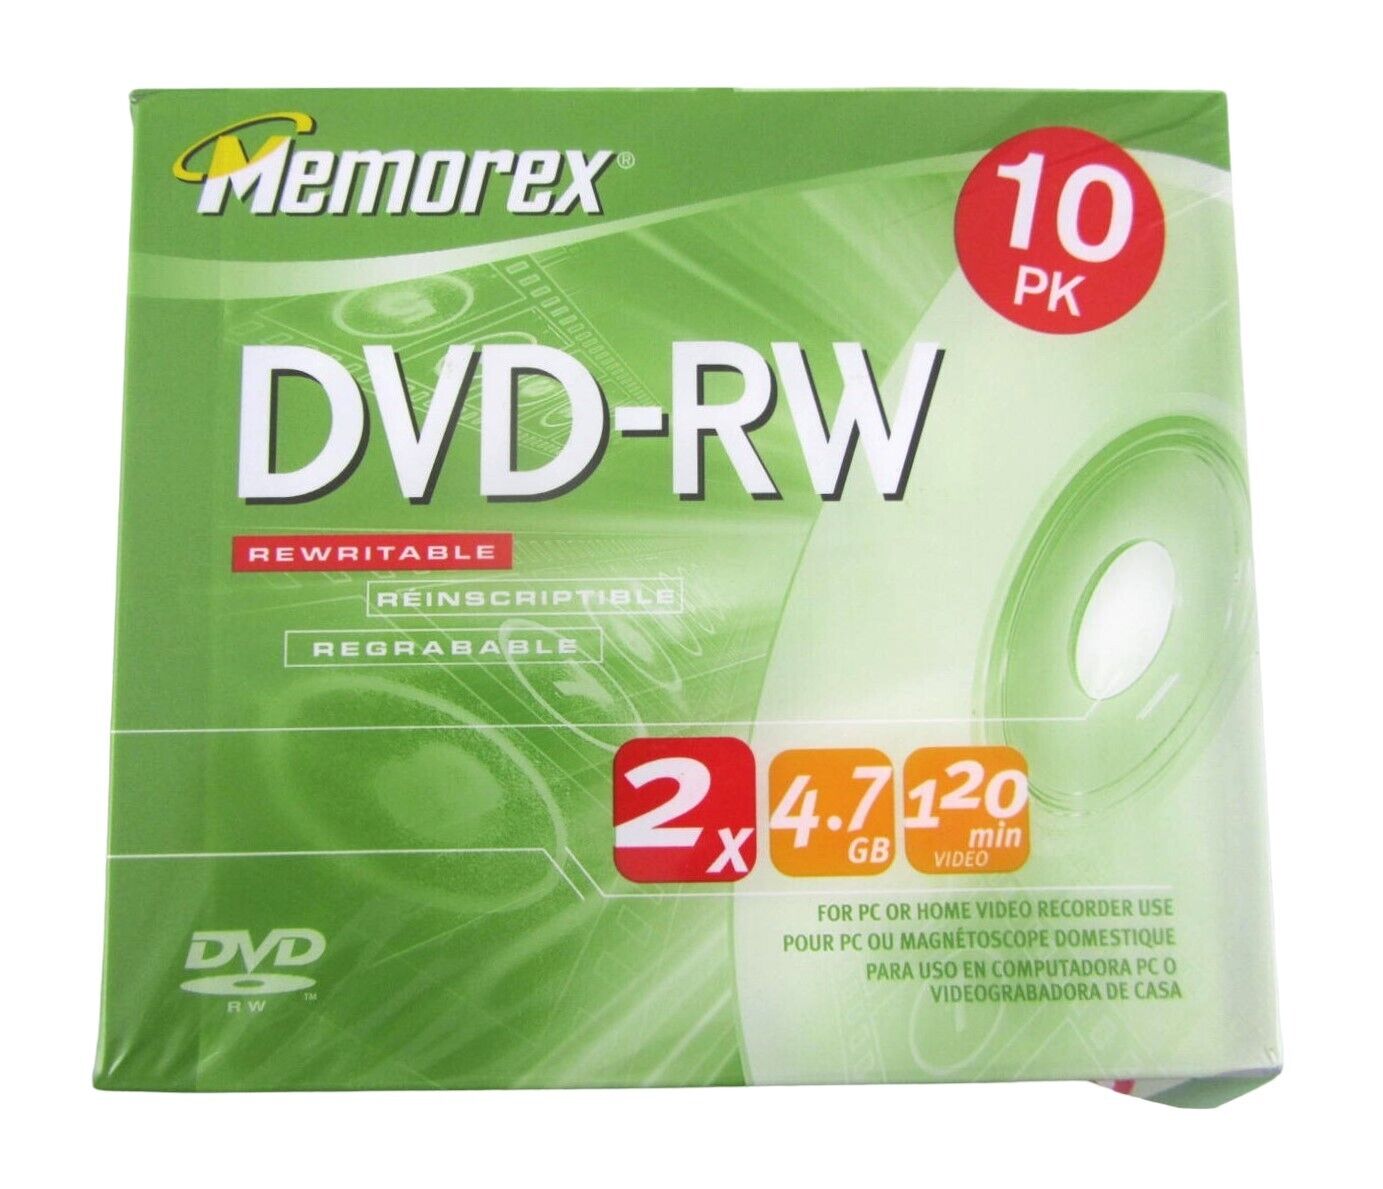 MEMOREX Pack OF 10 DVD-RW With Cases 2x 4.7GB 120 Min NEW SEALED with SEAL TEAR